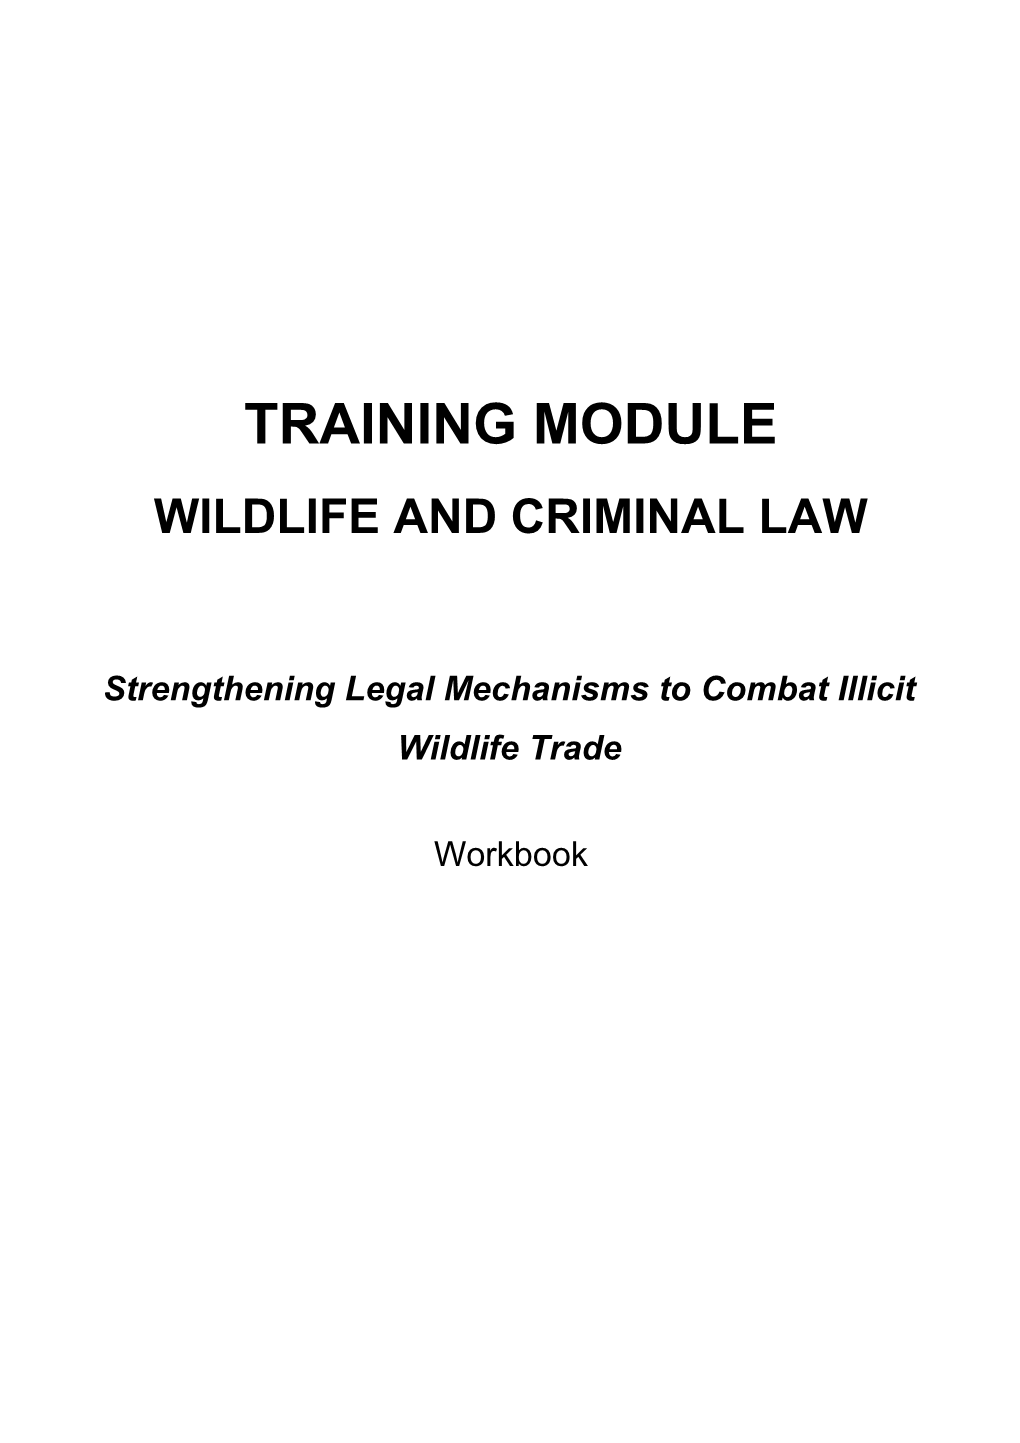 Wildlife and Criminal Law